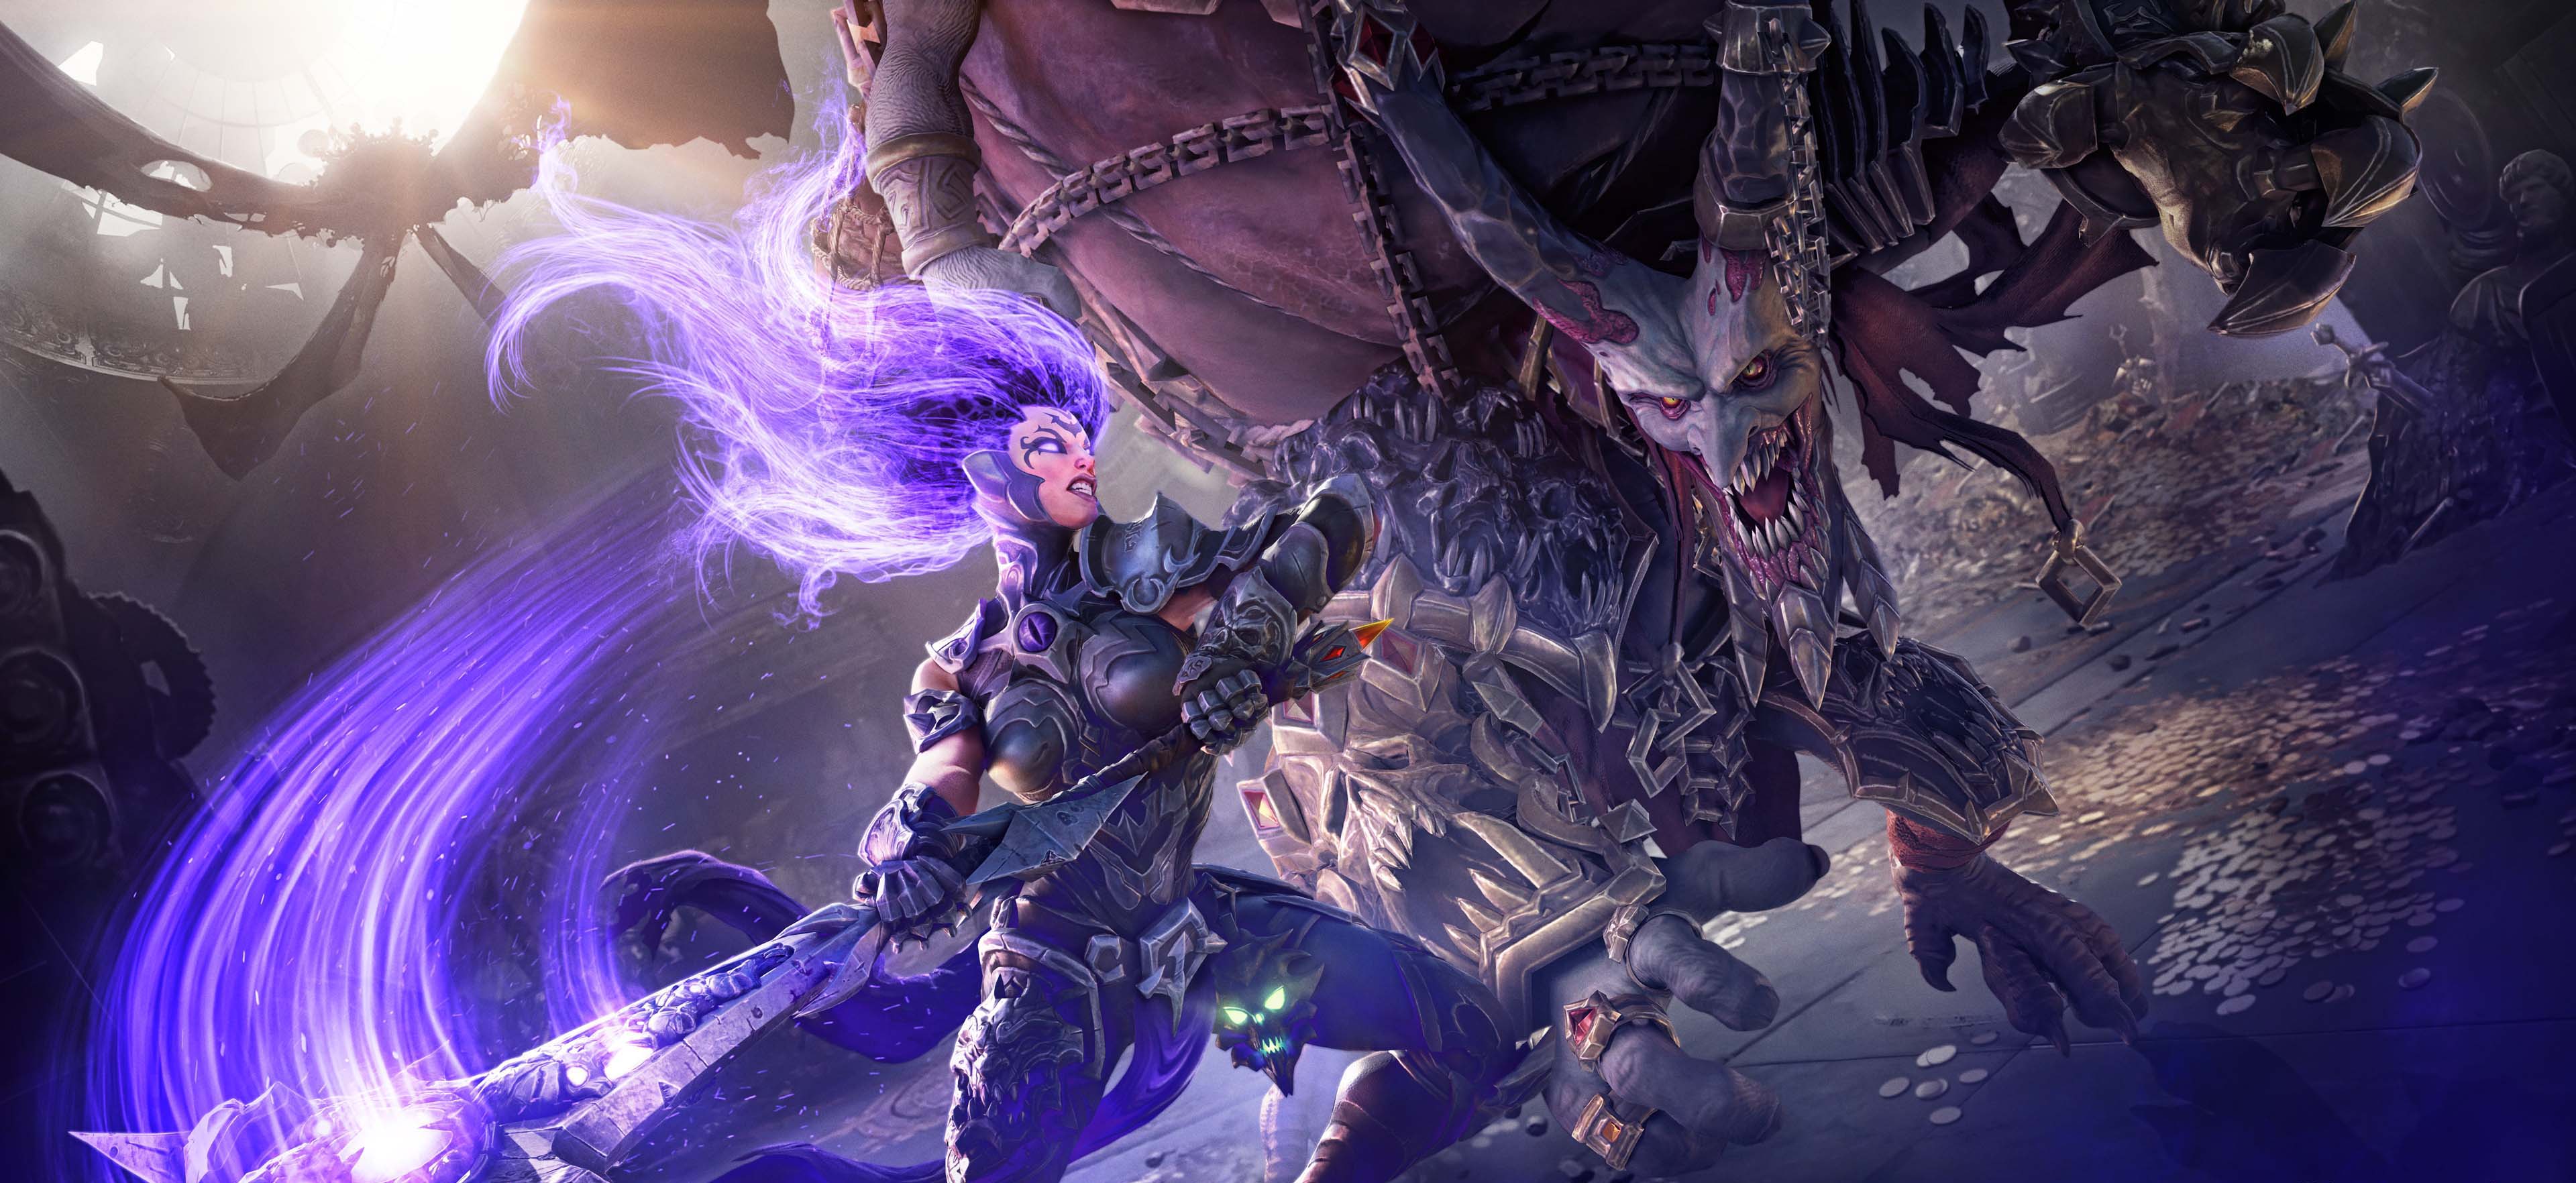 New “Force Hollow” Trailer and Screenshots for Darksiders III